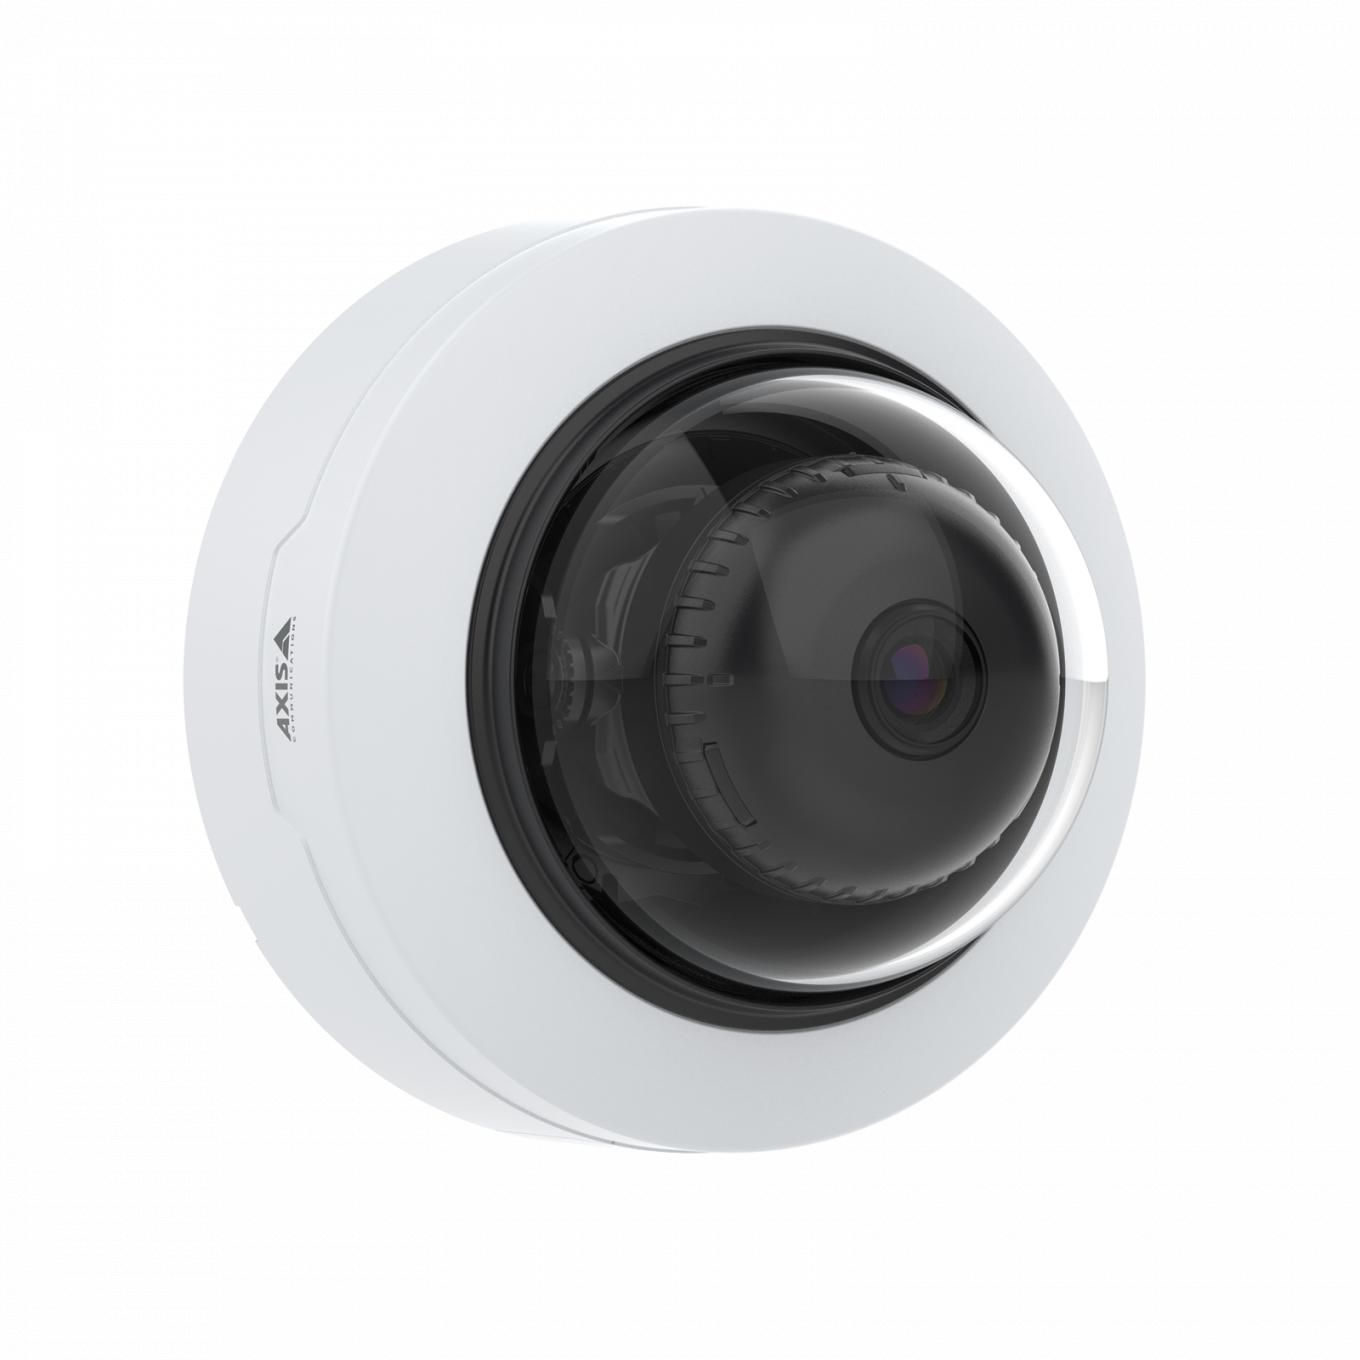 AXIS P3265-V Dome camera mounted on wall from right